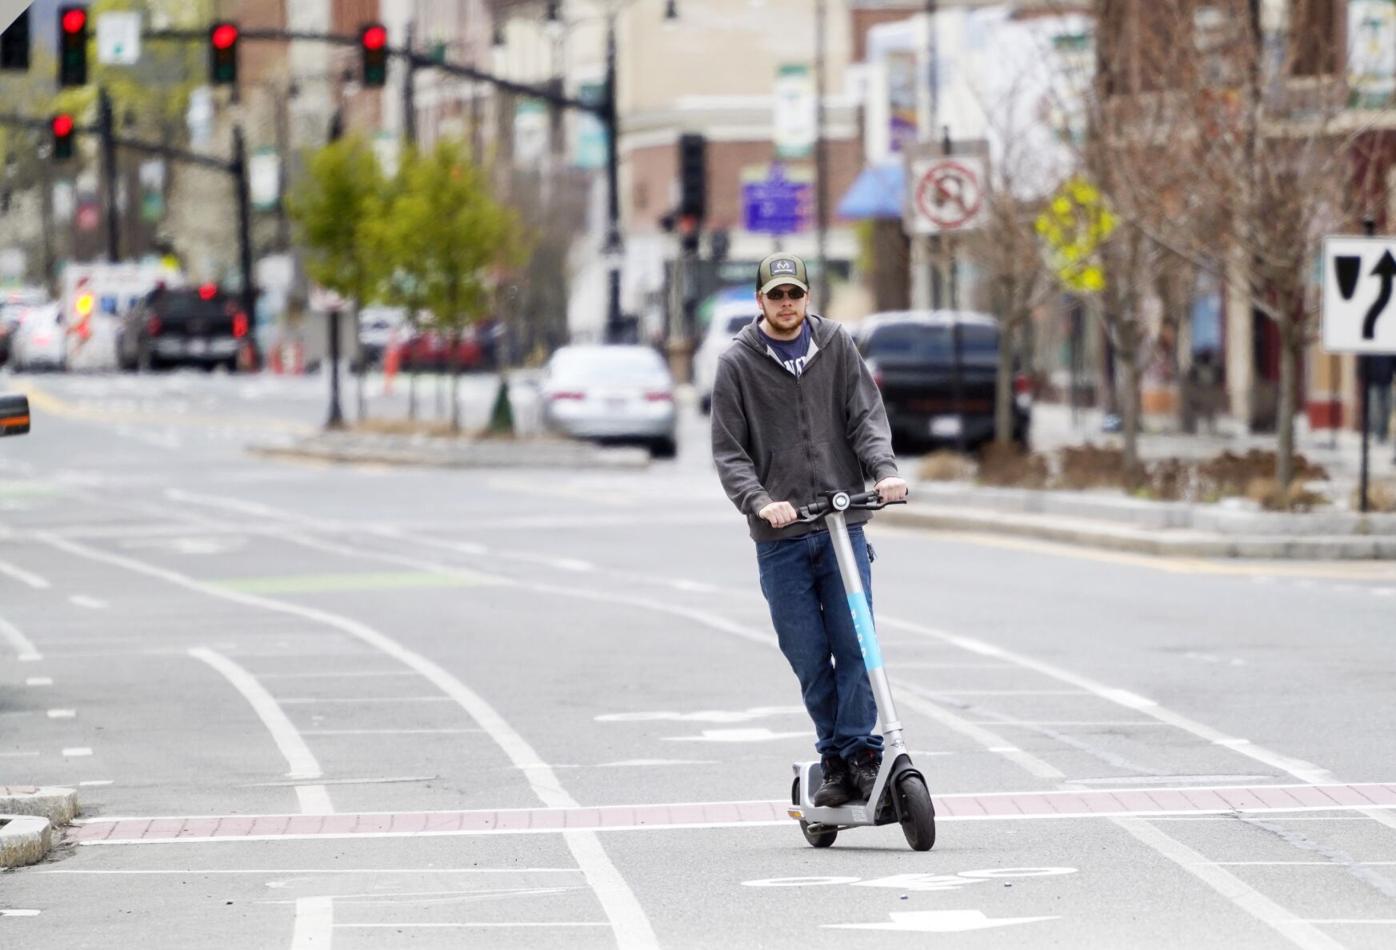 The Birds have landed. Here's what you need to know Pittsfield's new e-scooters | Berkshires | berkshireeagle.com